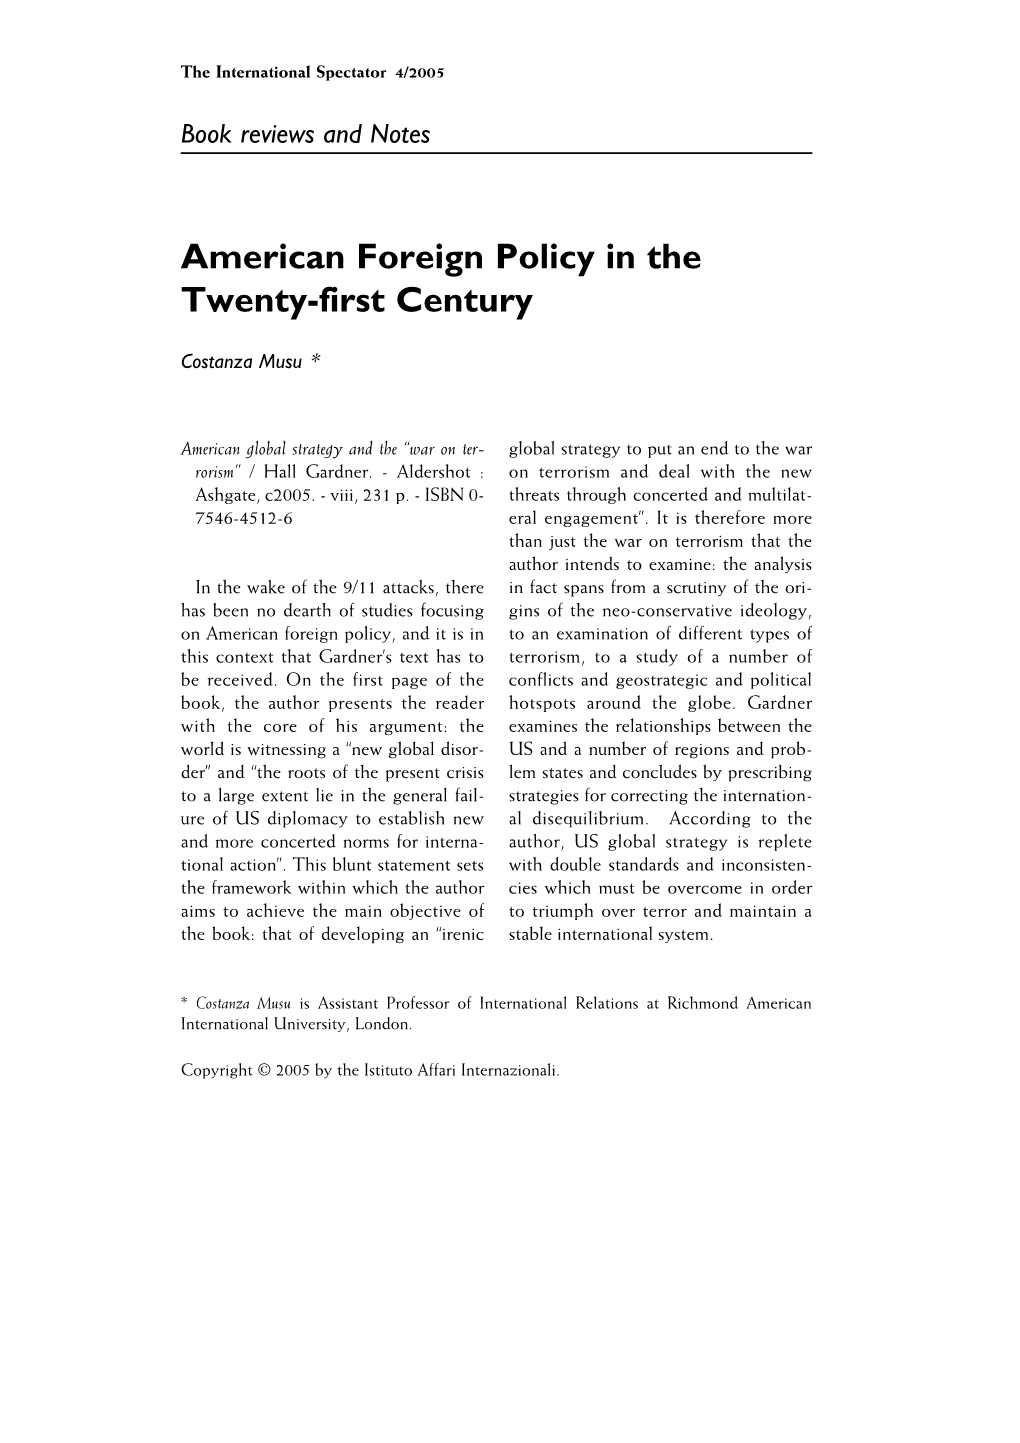 American Foreign Policy in the Twenty-First Century